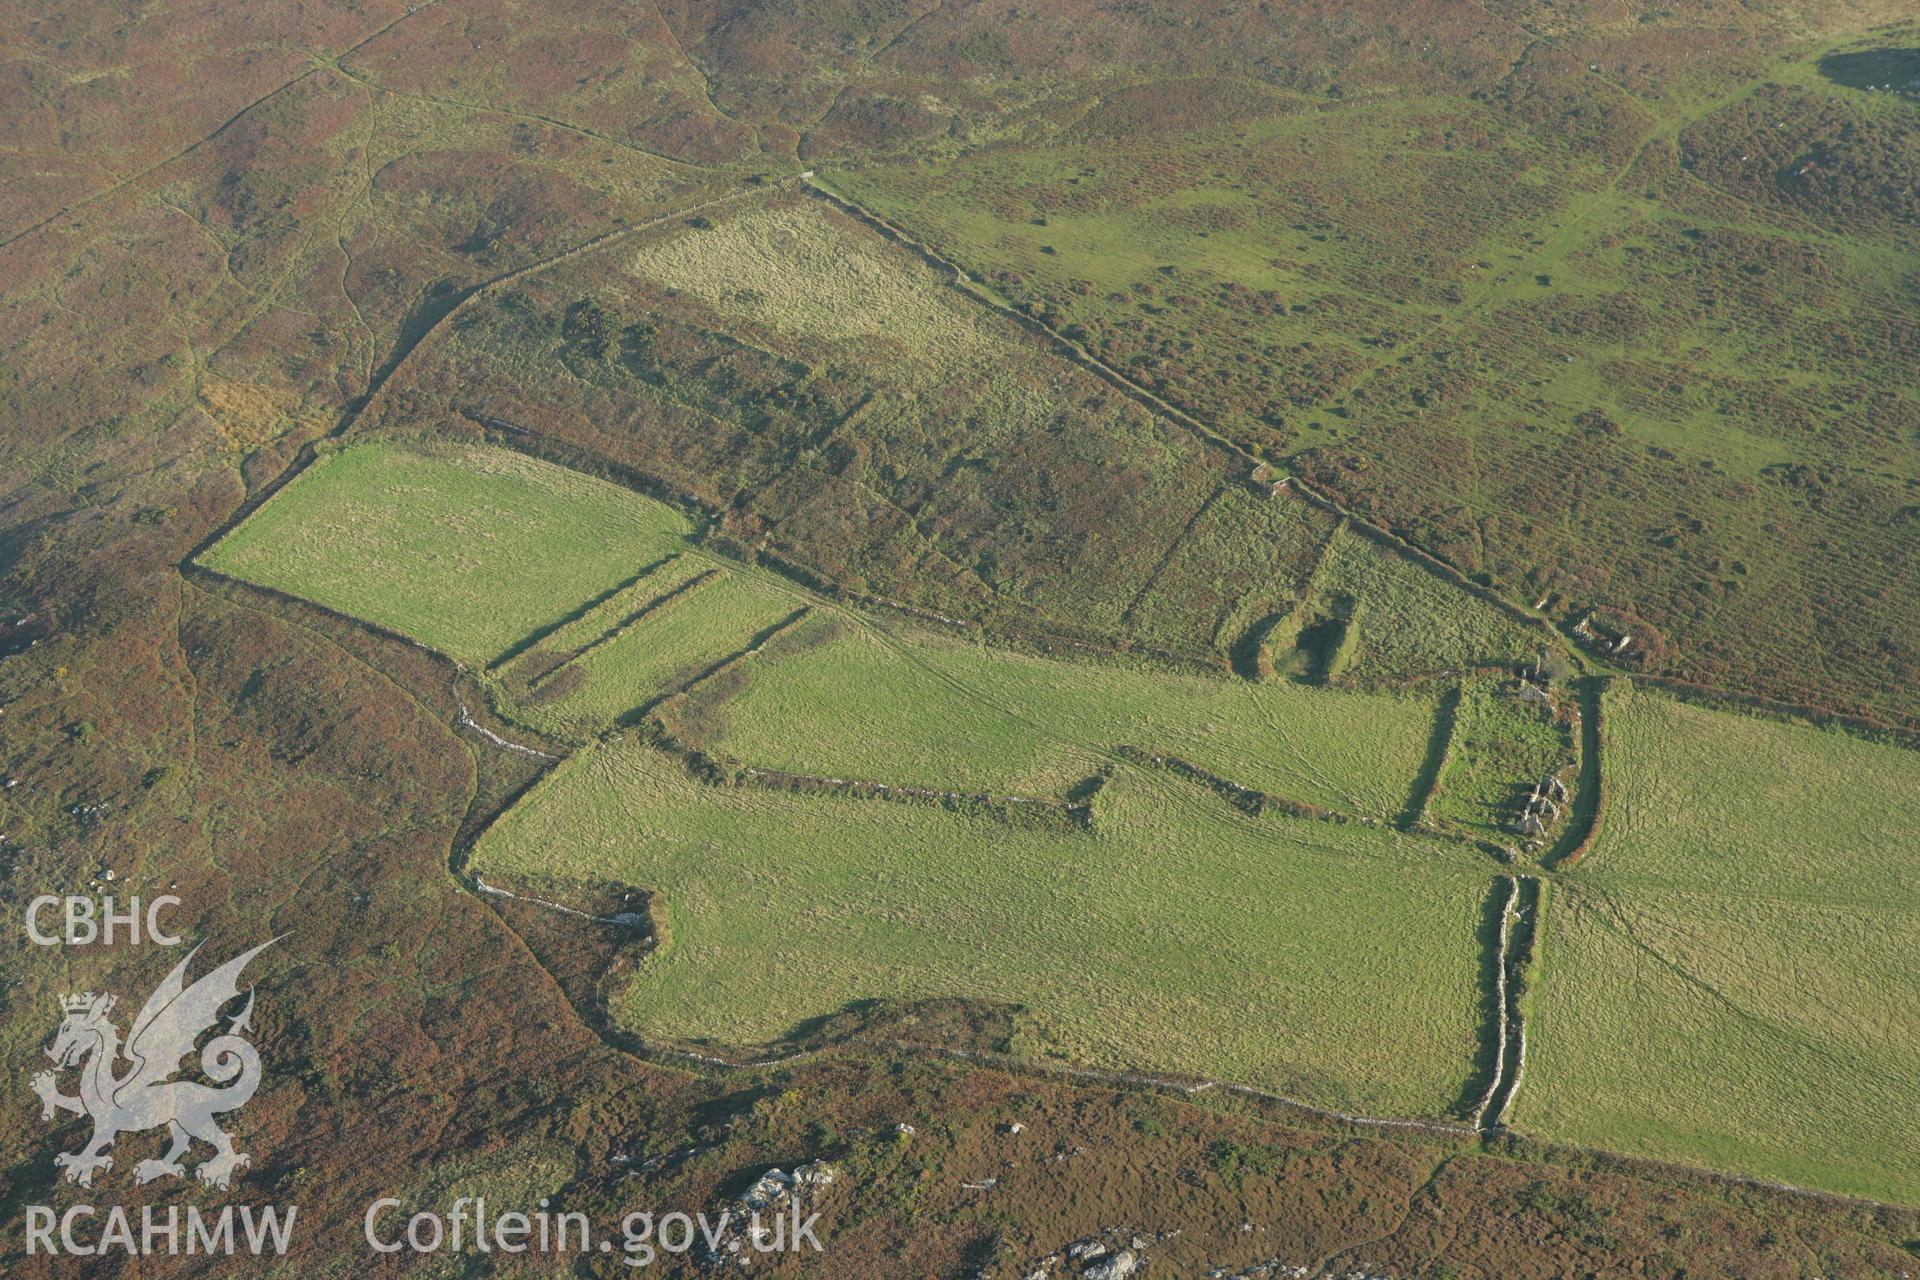 RCAHMW colour oblique photograph of Maes y Mynydd. Taken by Toby Driver on 23/10/2007.